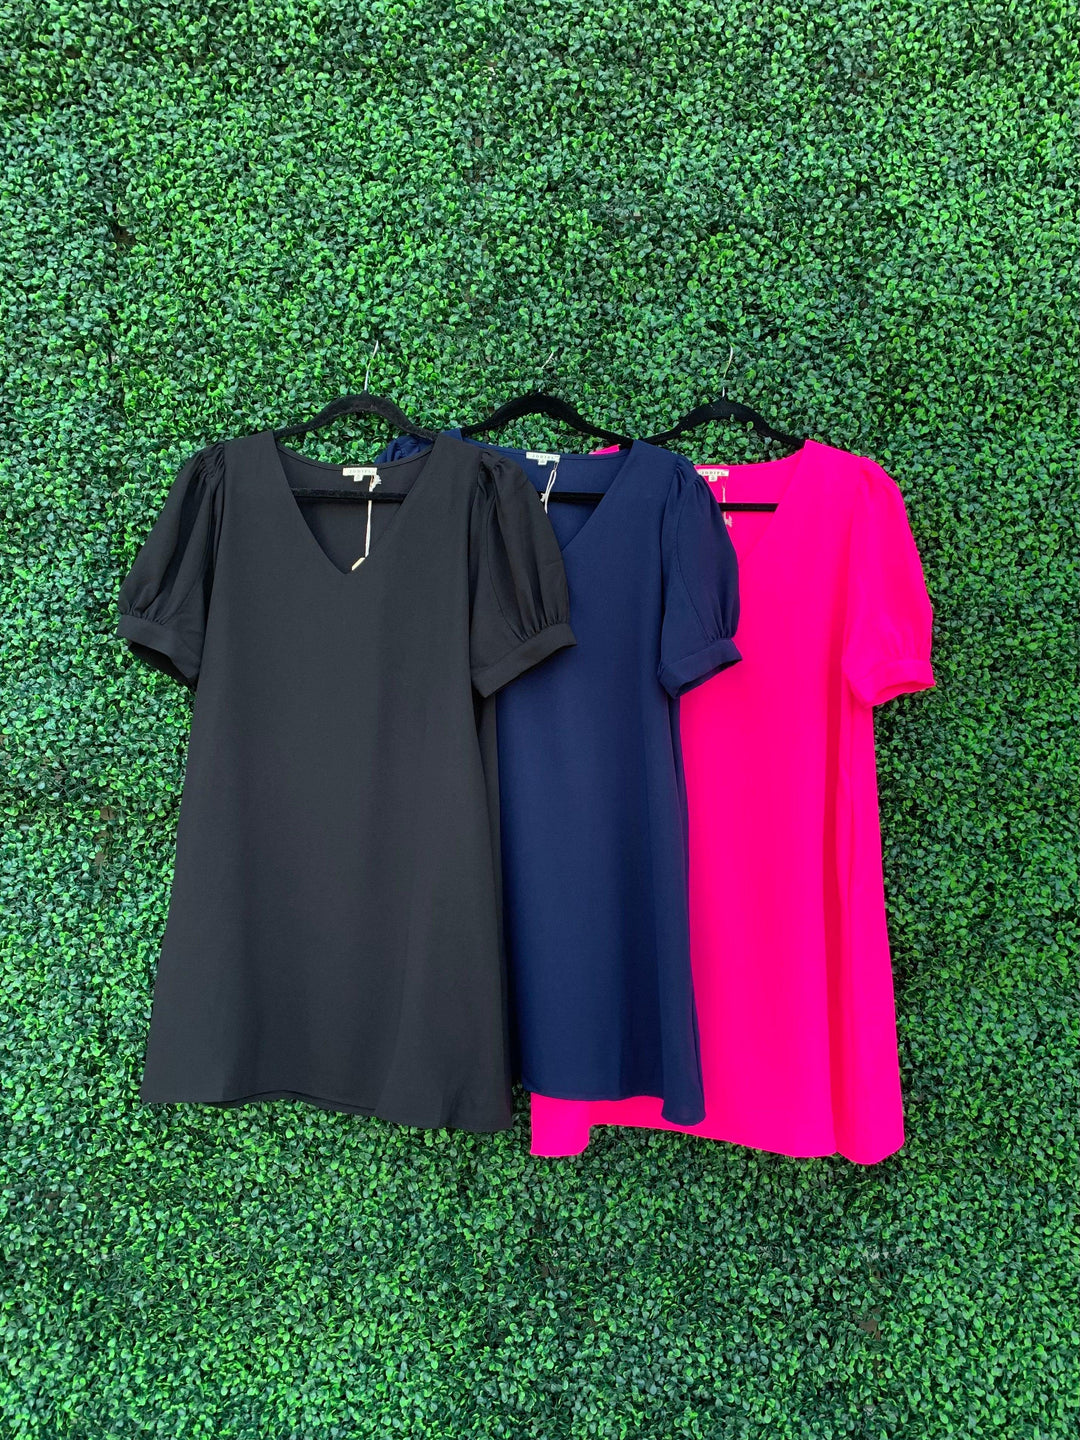 Black, pink, and navy short dress online and in store